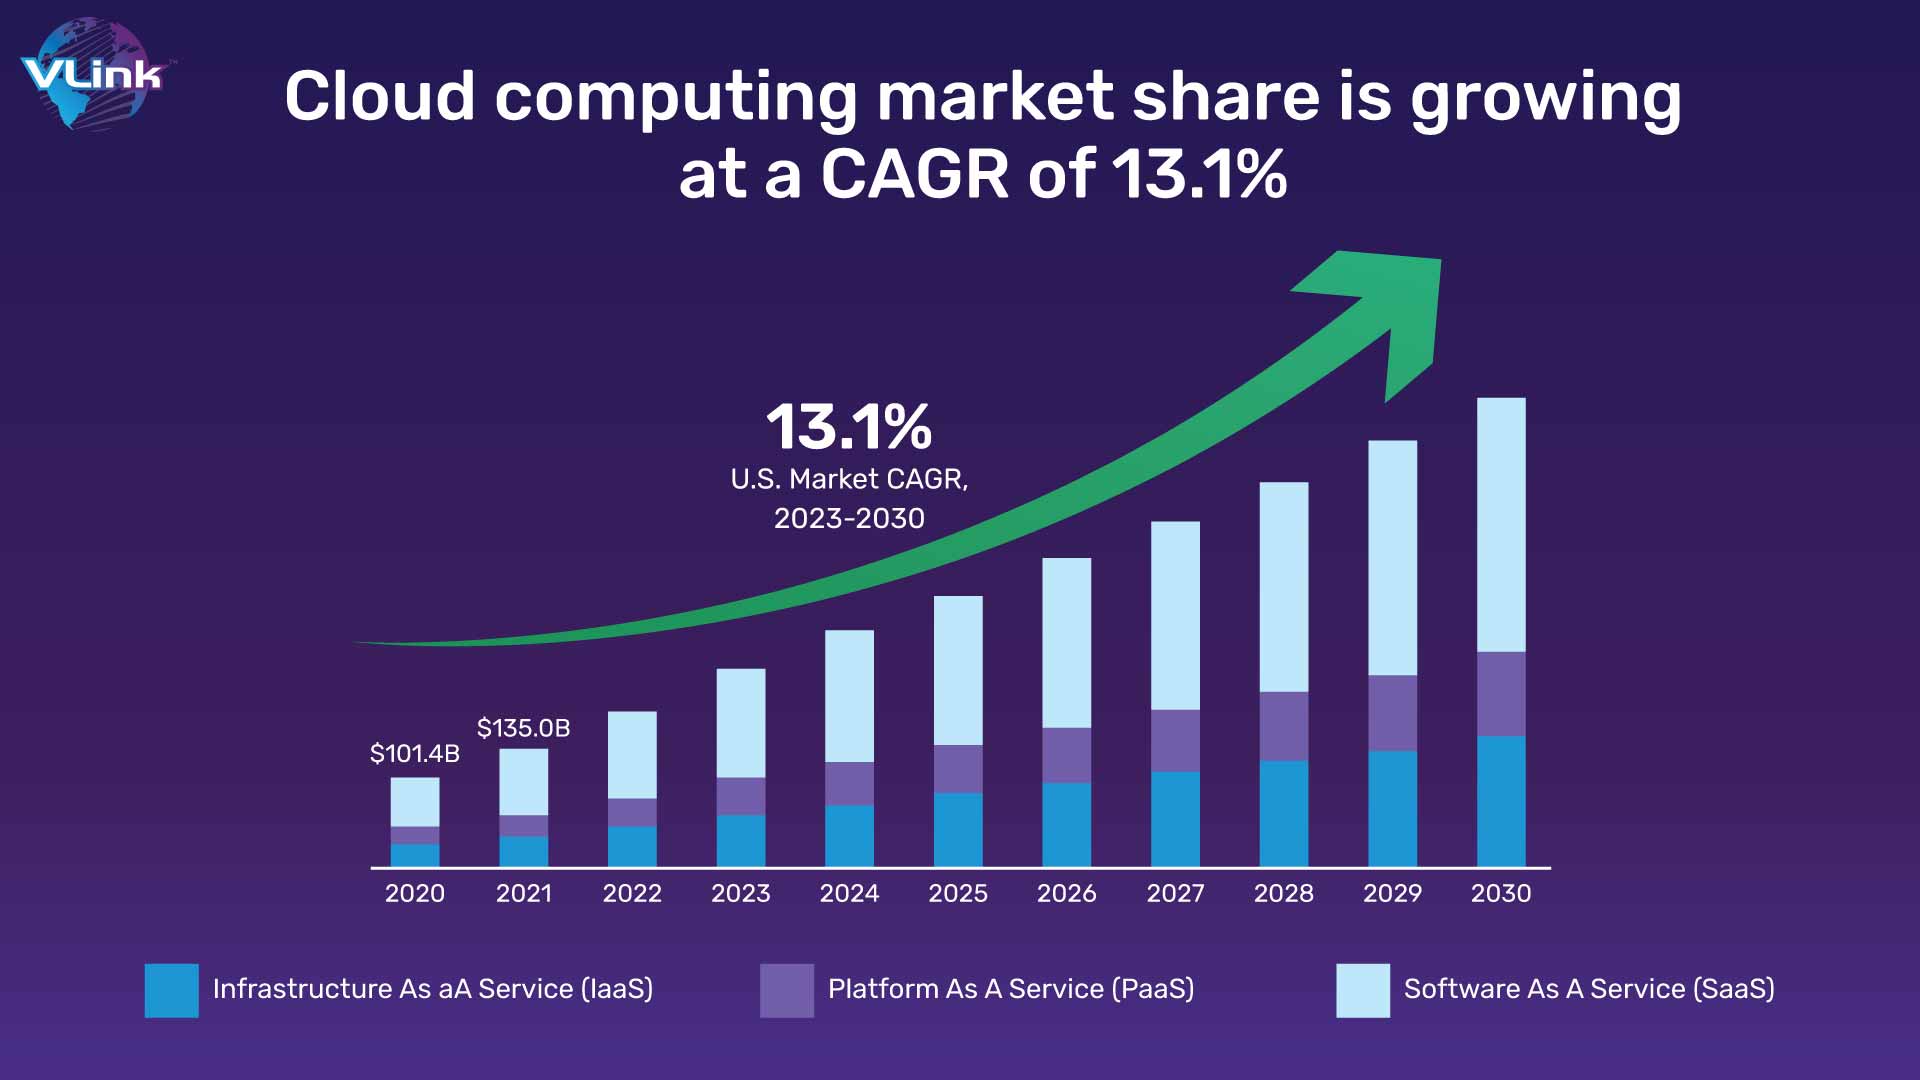 Cloud computing market share is growing at a CAGR of 13.1%